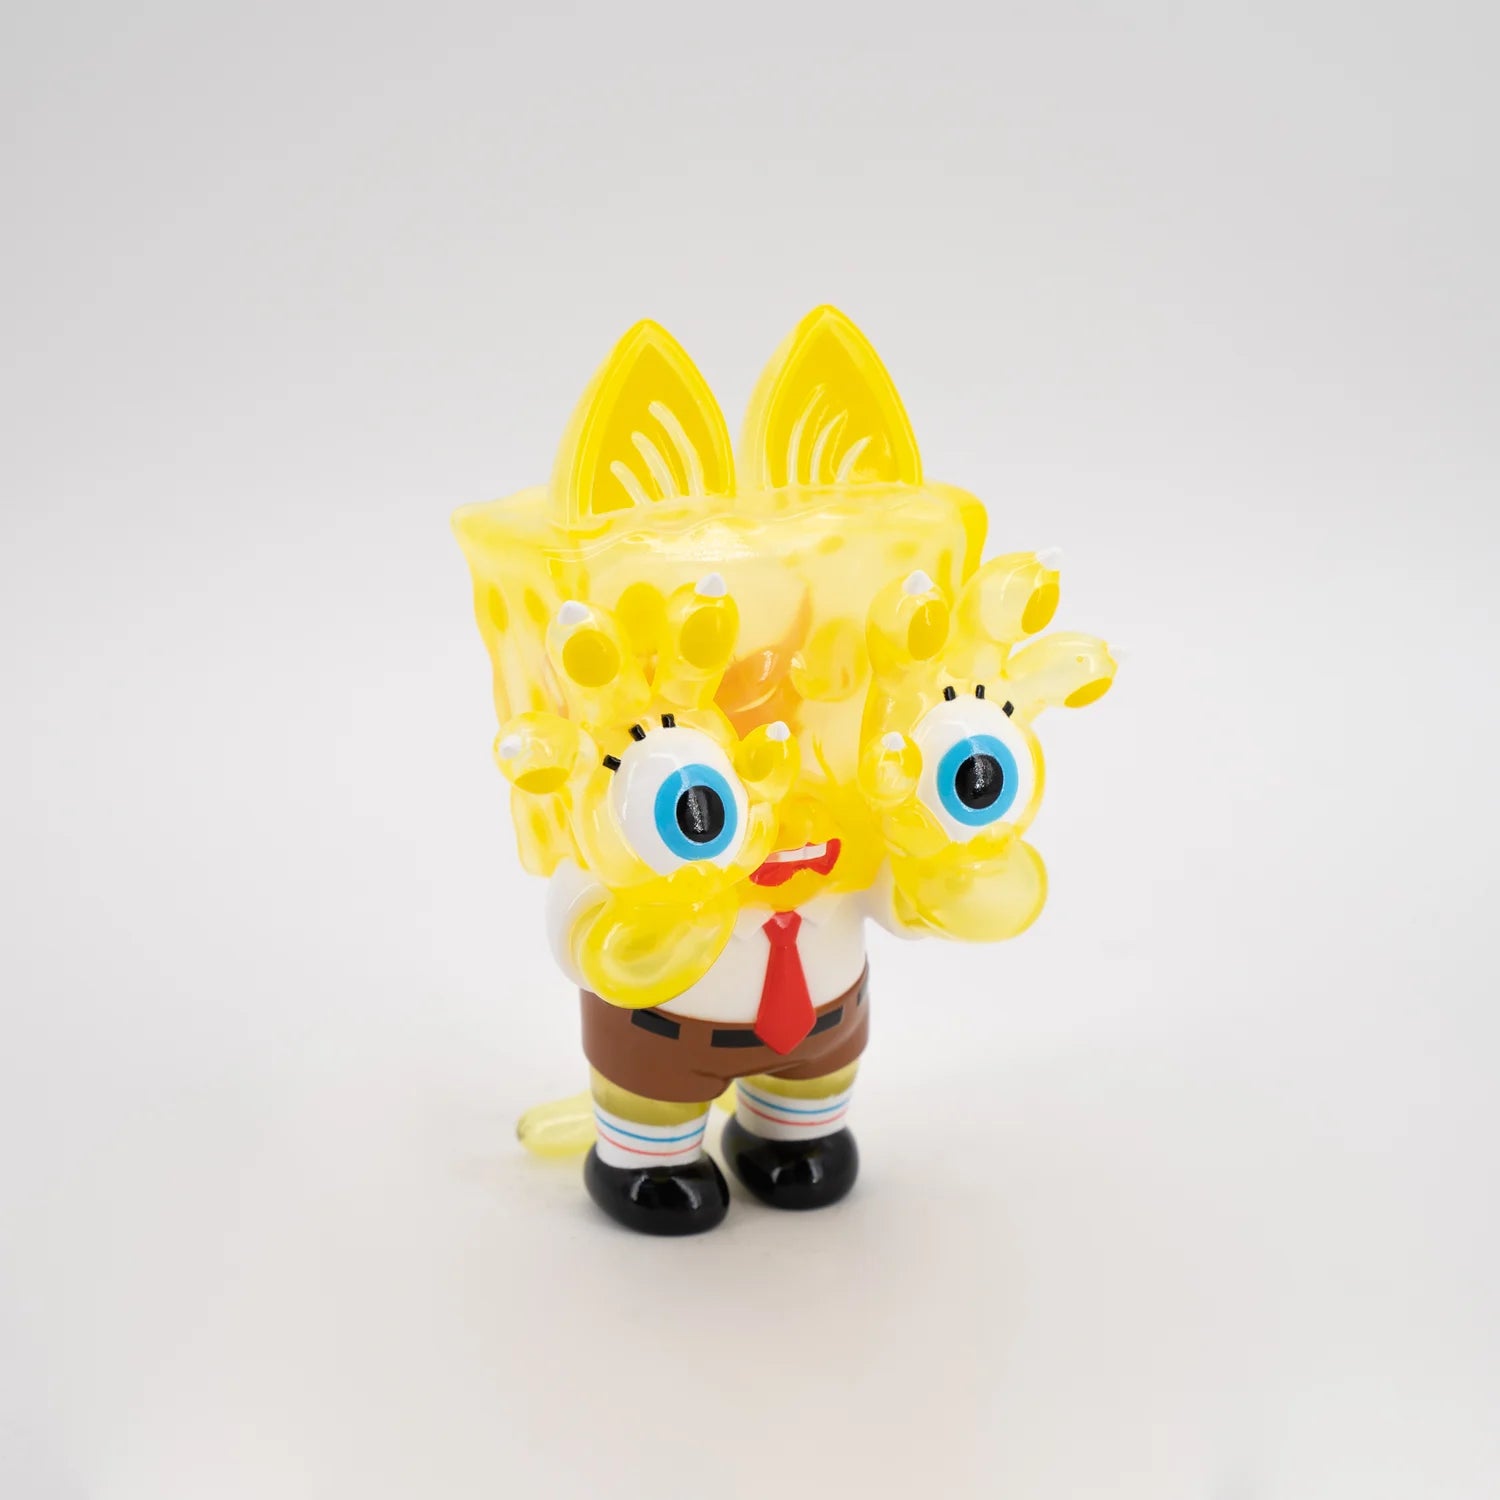 SPONGEBOB HELL'S CAT TRANSLUCENT SPECIAL EDITION by Grape Brain